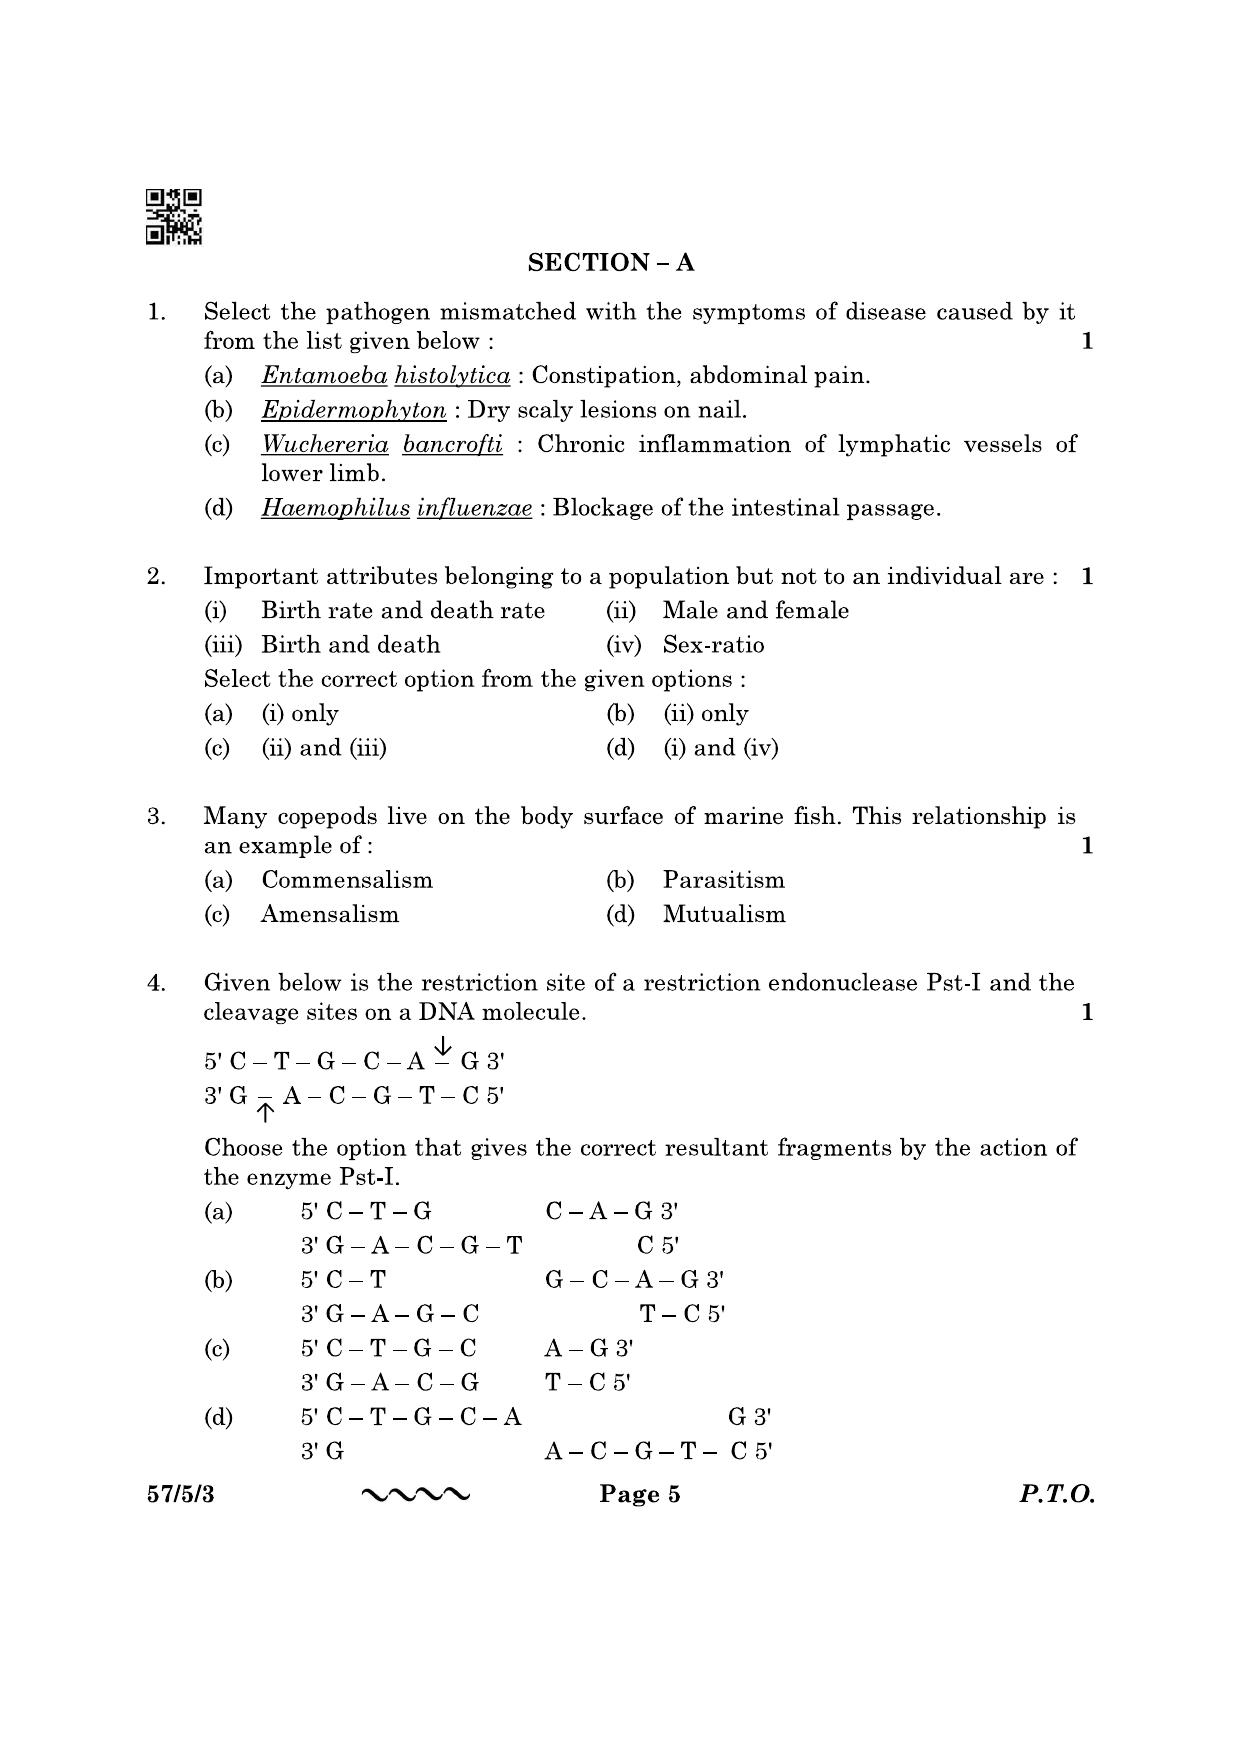 CBSE Class 12 57-5-3 Biology 2023 Question Paper - Page 5